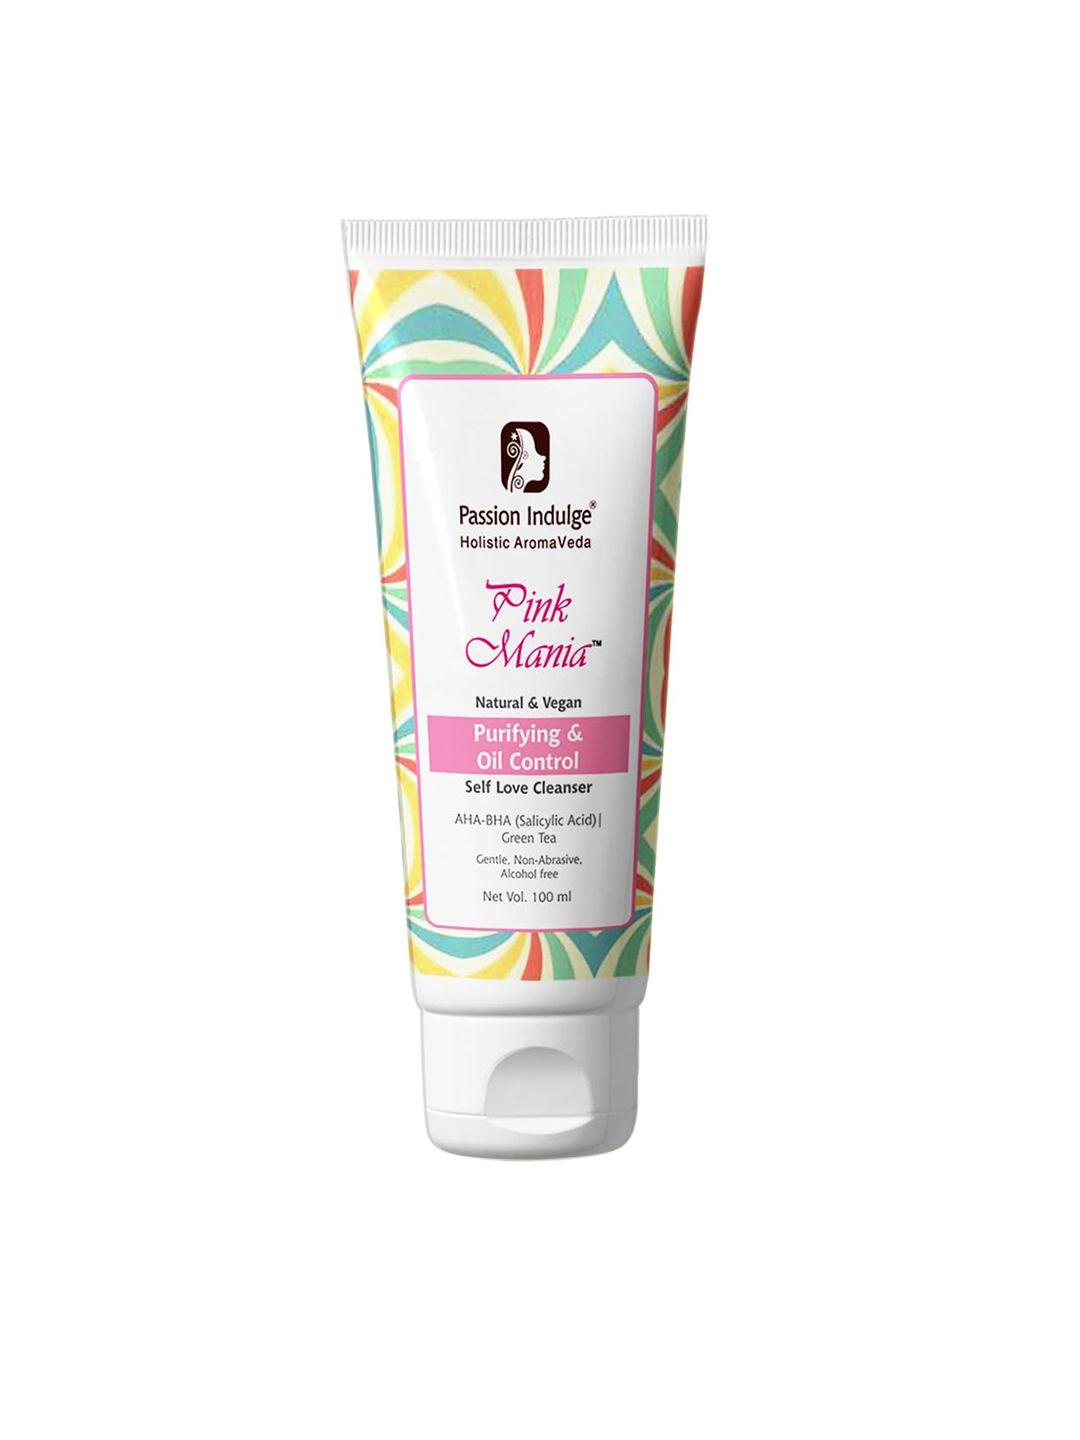 passion indulge pink mania purifying & oil control face cleanser with aha bha - 100ml